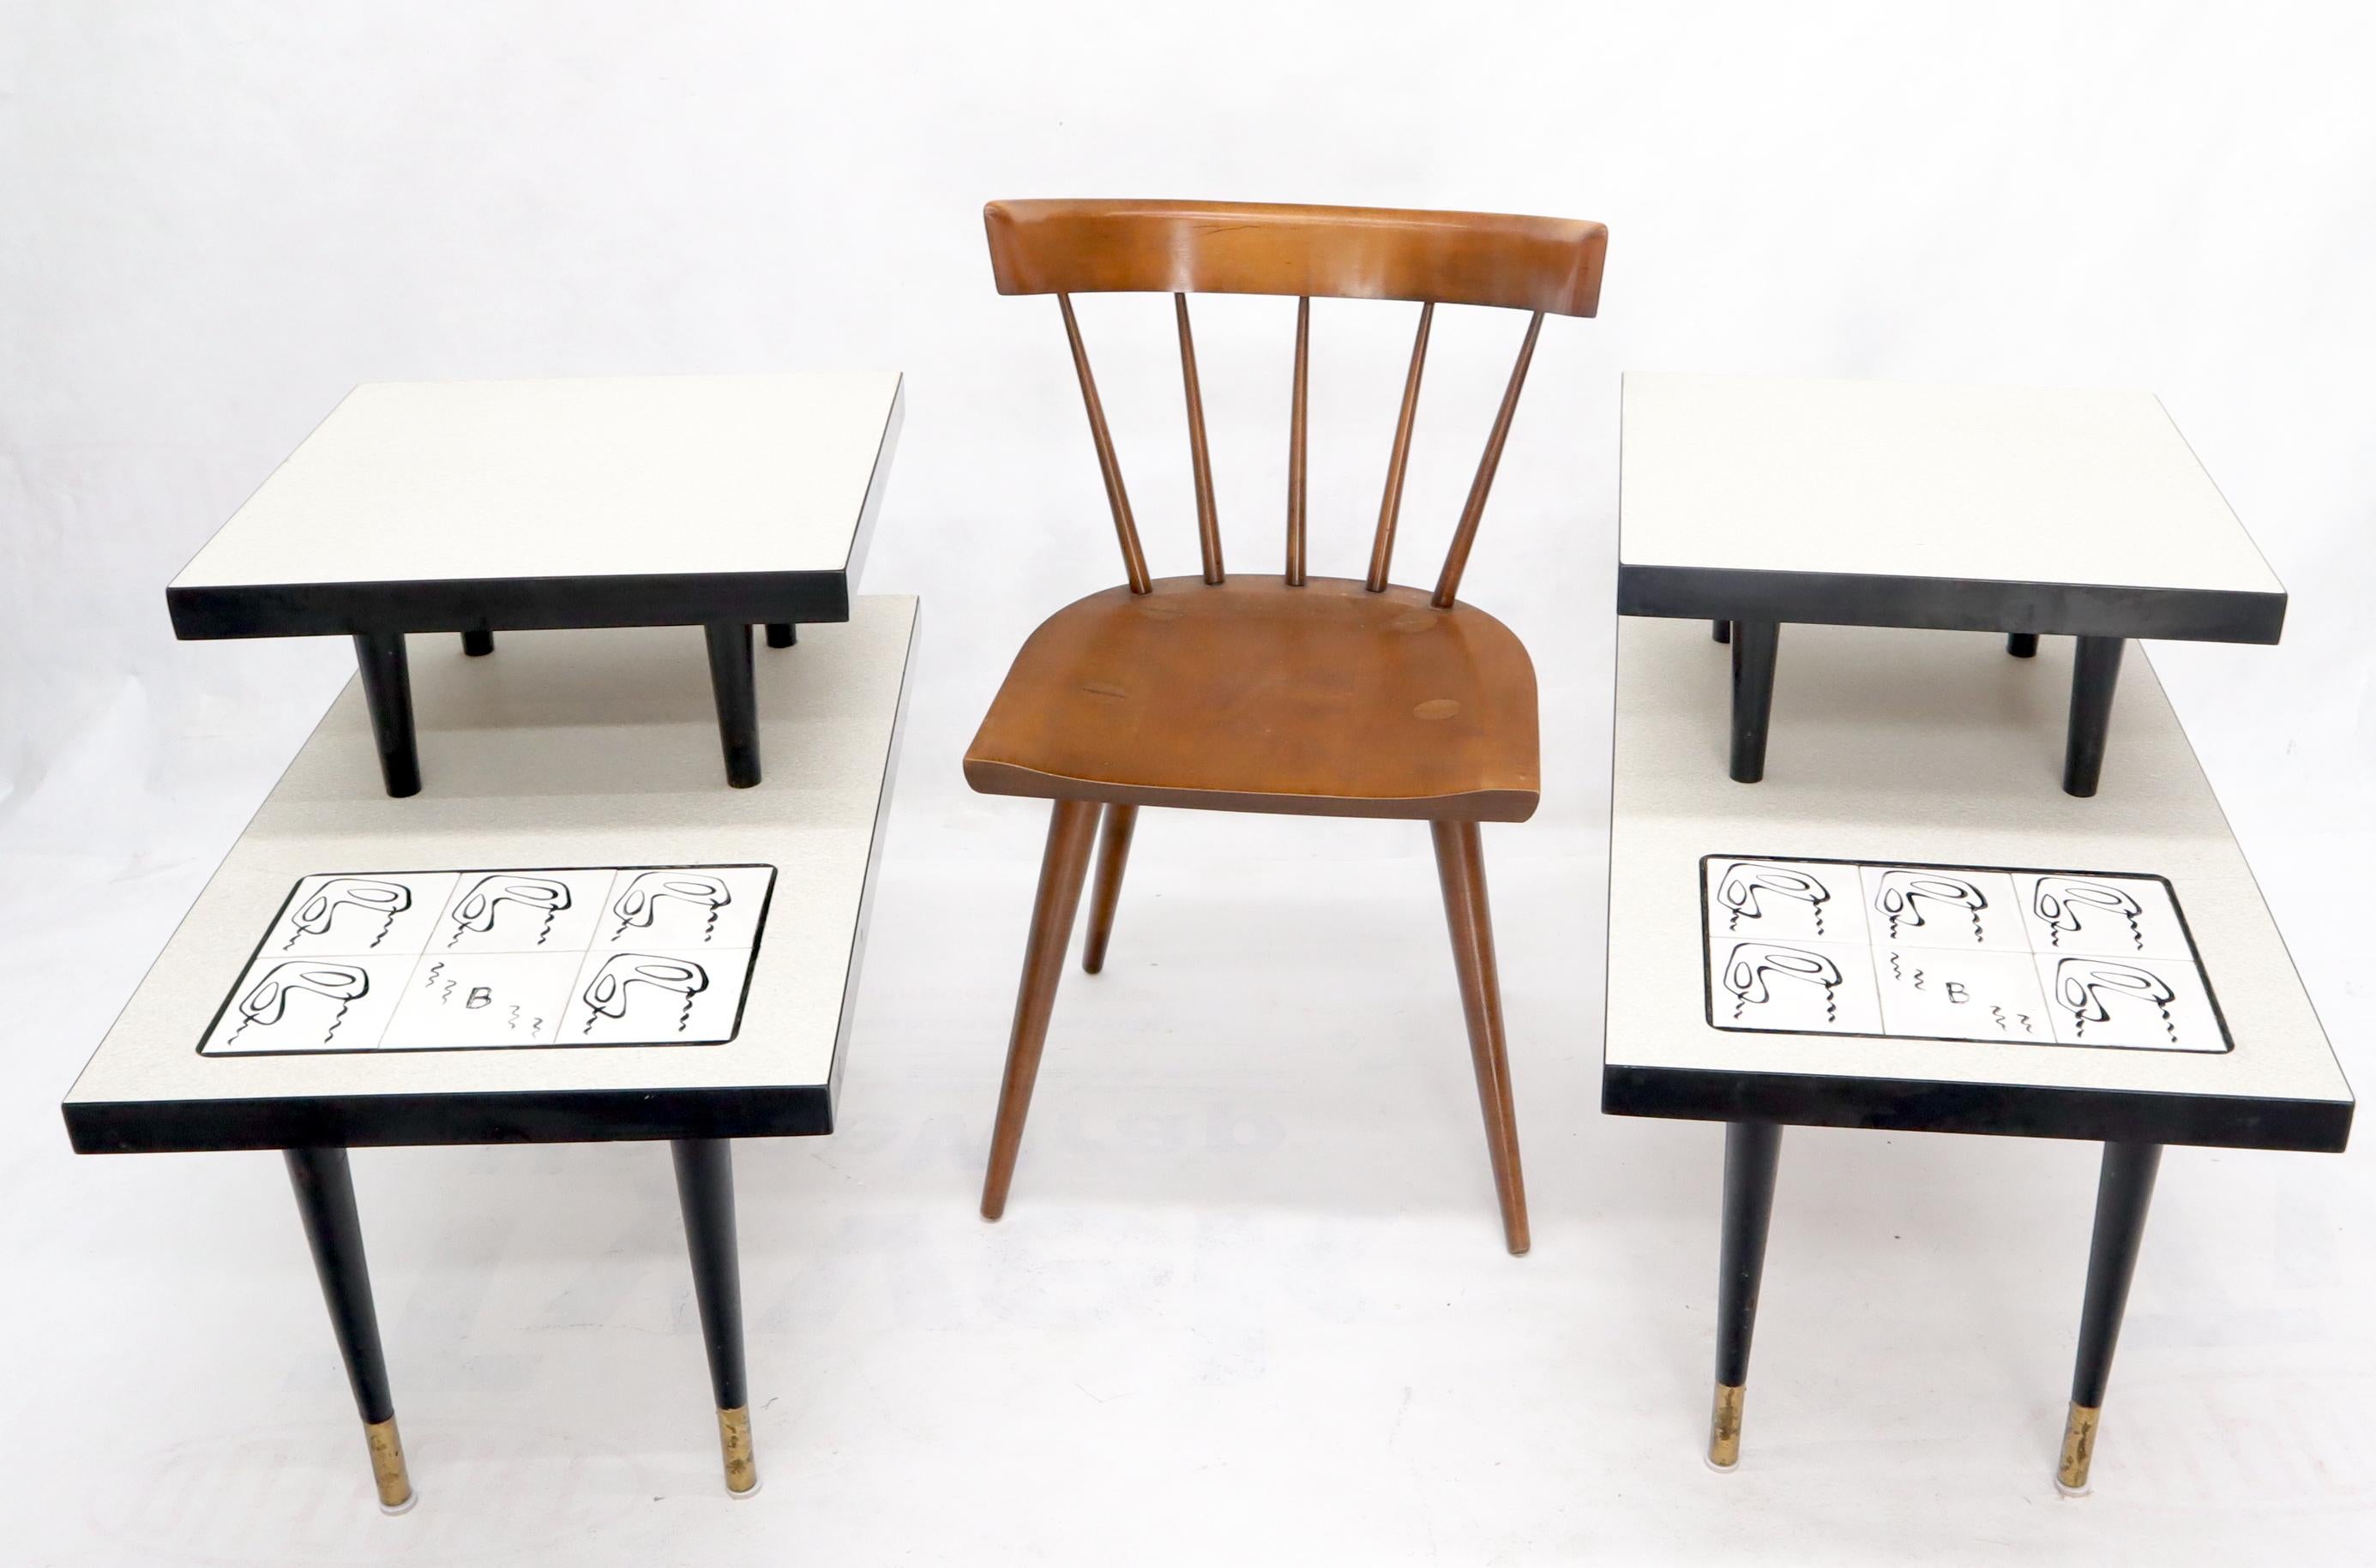 Mid-Century Modern pair of art tile step tables standing on dowel shape legs with brass legs tips. Solid heavy laminated hardwood construction.